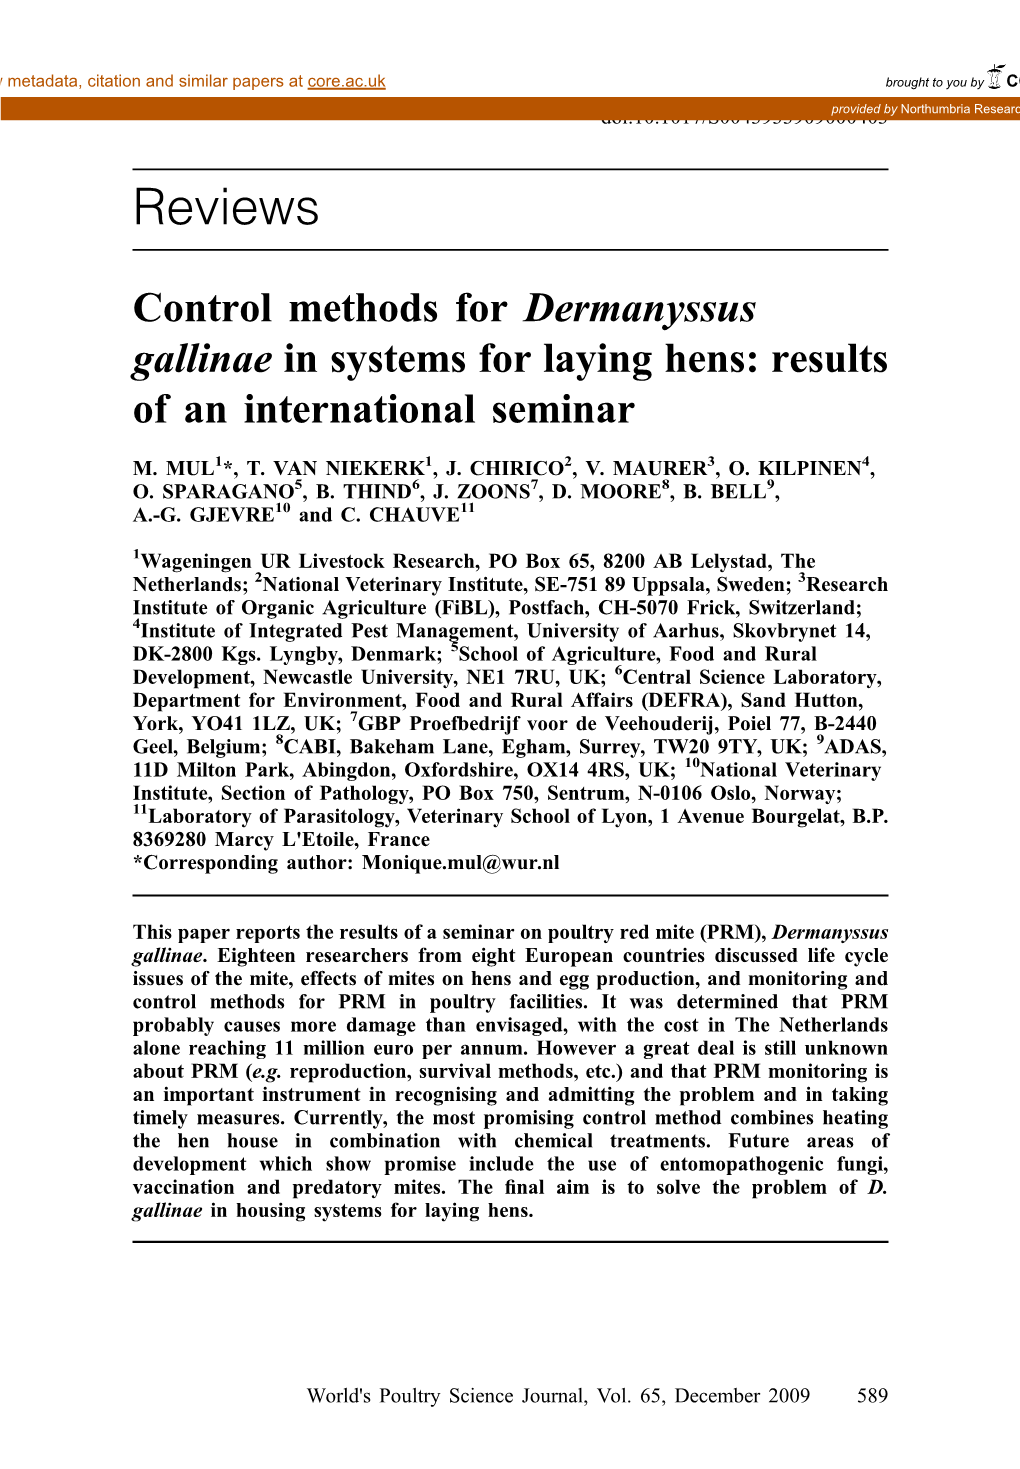 Control Methods for Dermanyssus Gallinae in Systems for Laying Hens: Results of an International Seminar